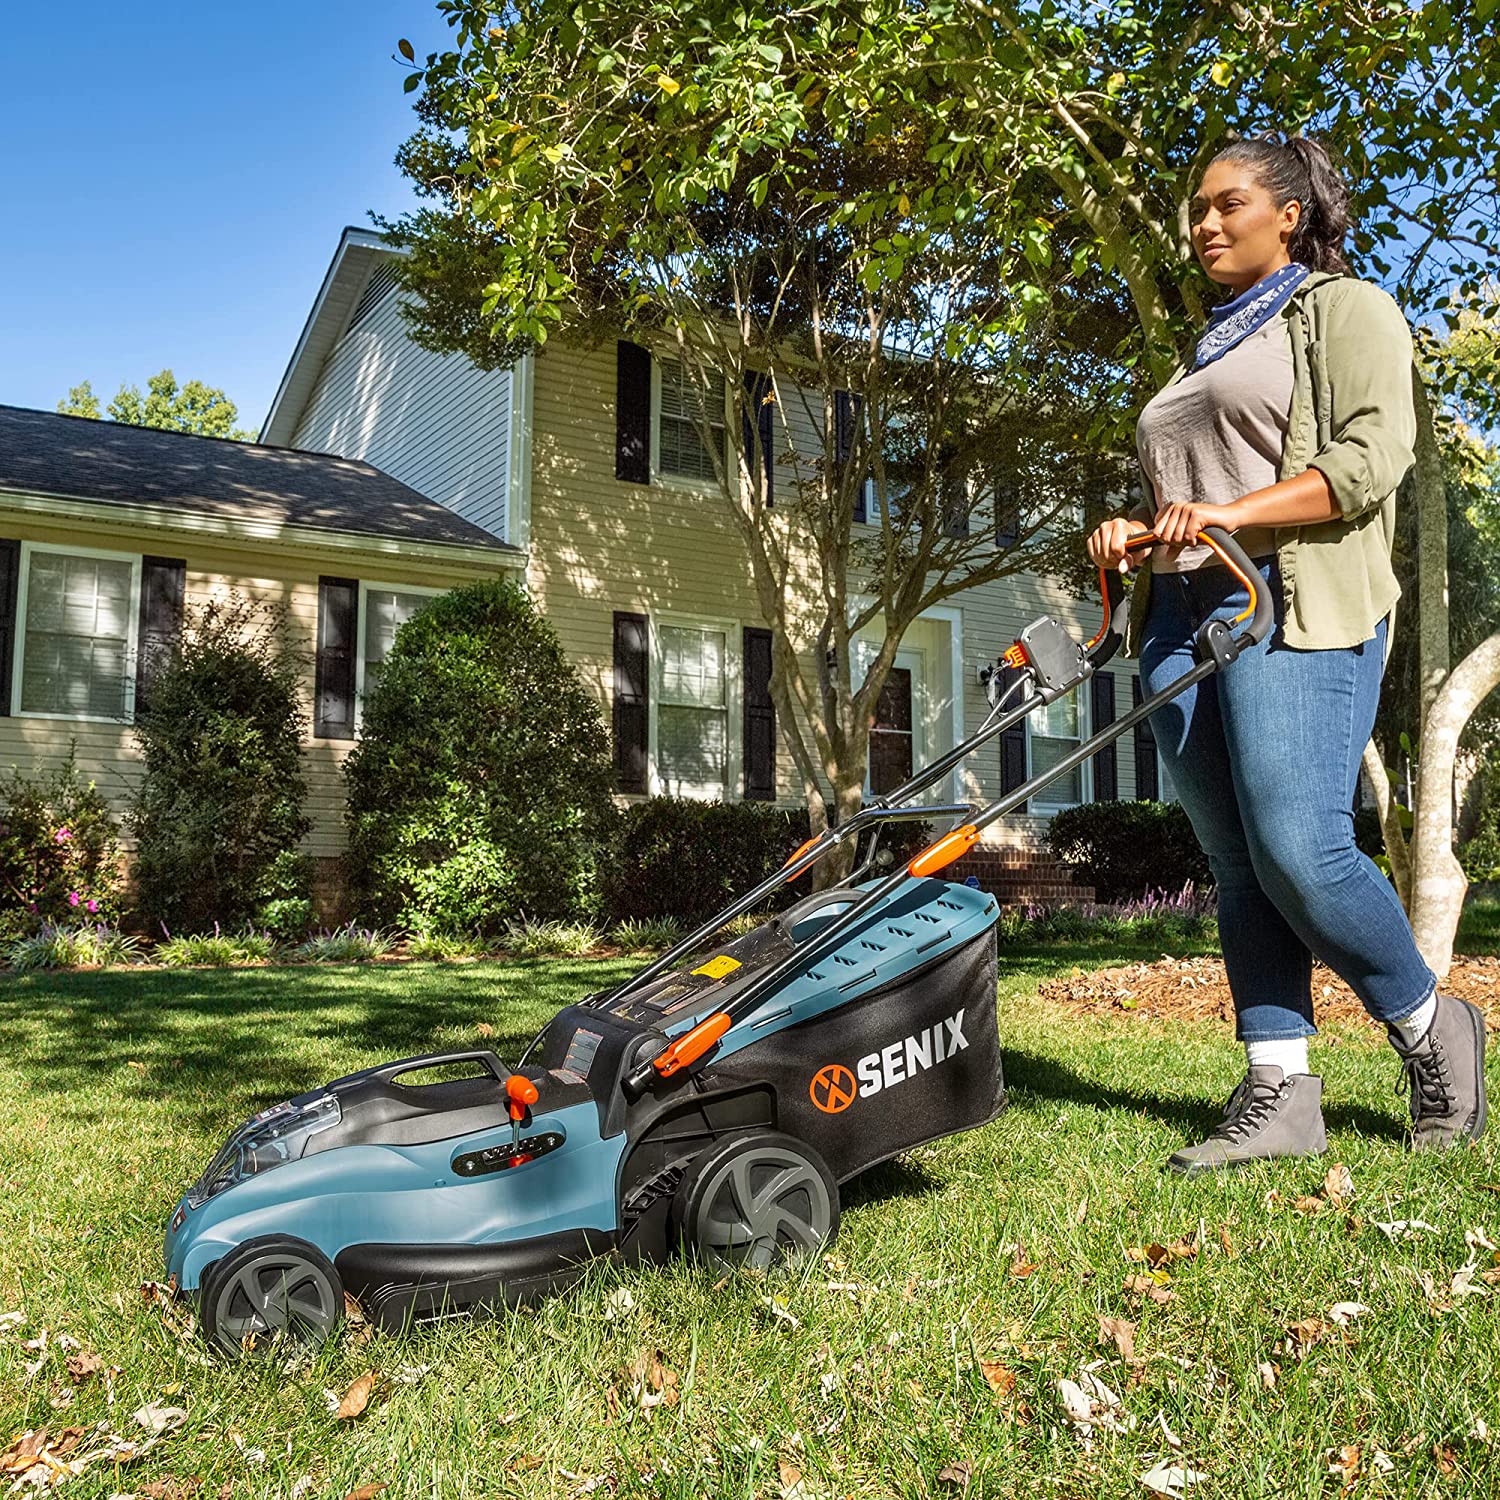 SENIX Electric Lawn Mower， 17-Inch， 58V Max* Cordless Lawn Mower with Brushless Motor， 6-Position Height Adjustment， 2.5Ah Lithium Ion Battery and Charger Included， LPPX5-M， Blue